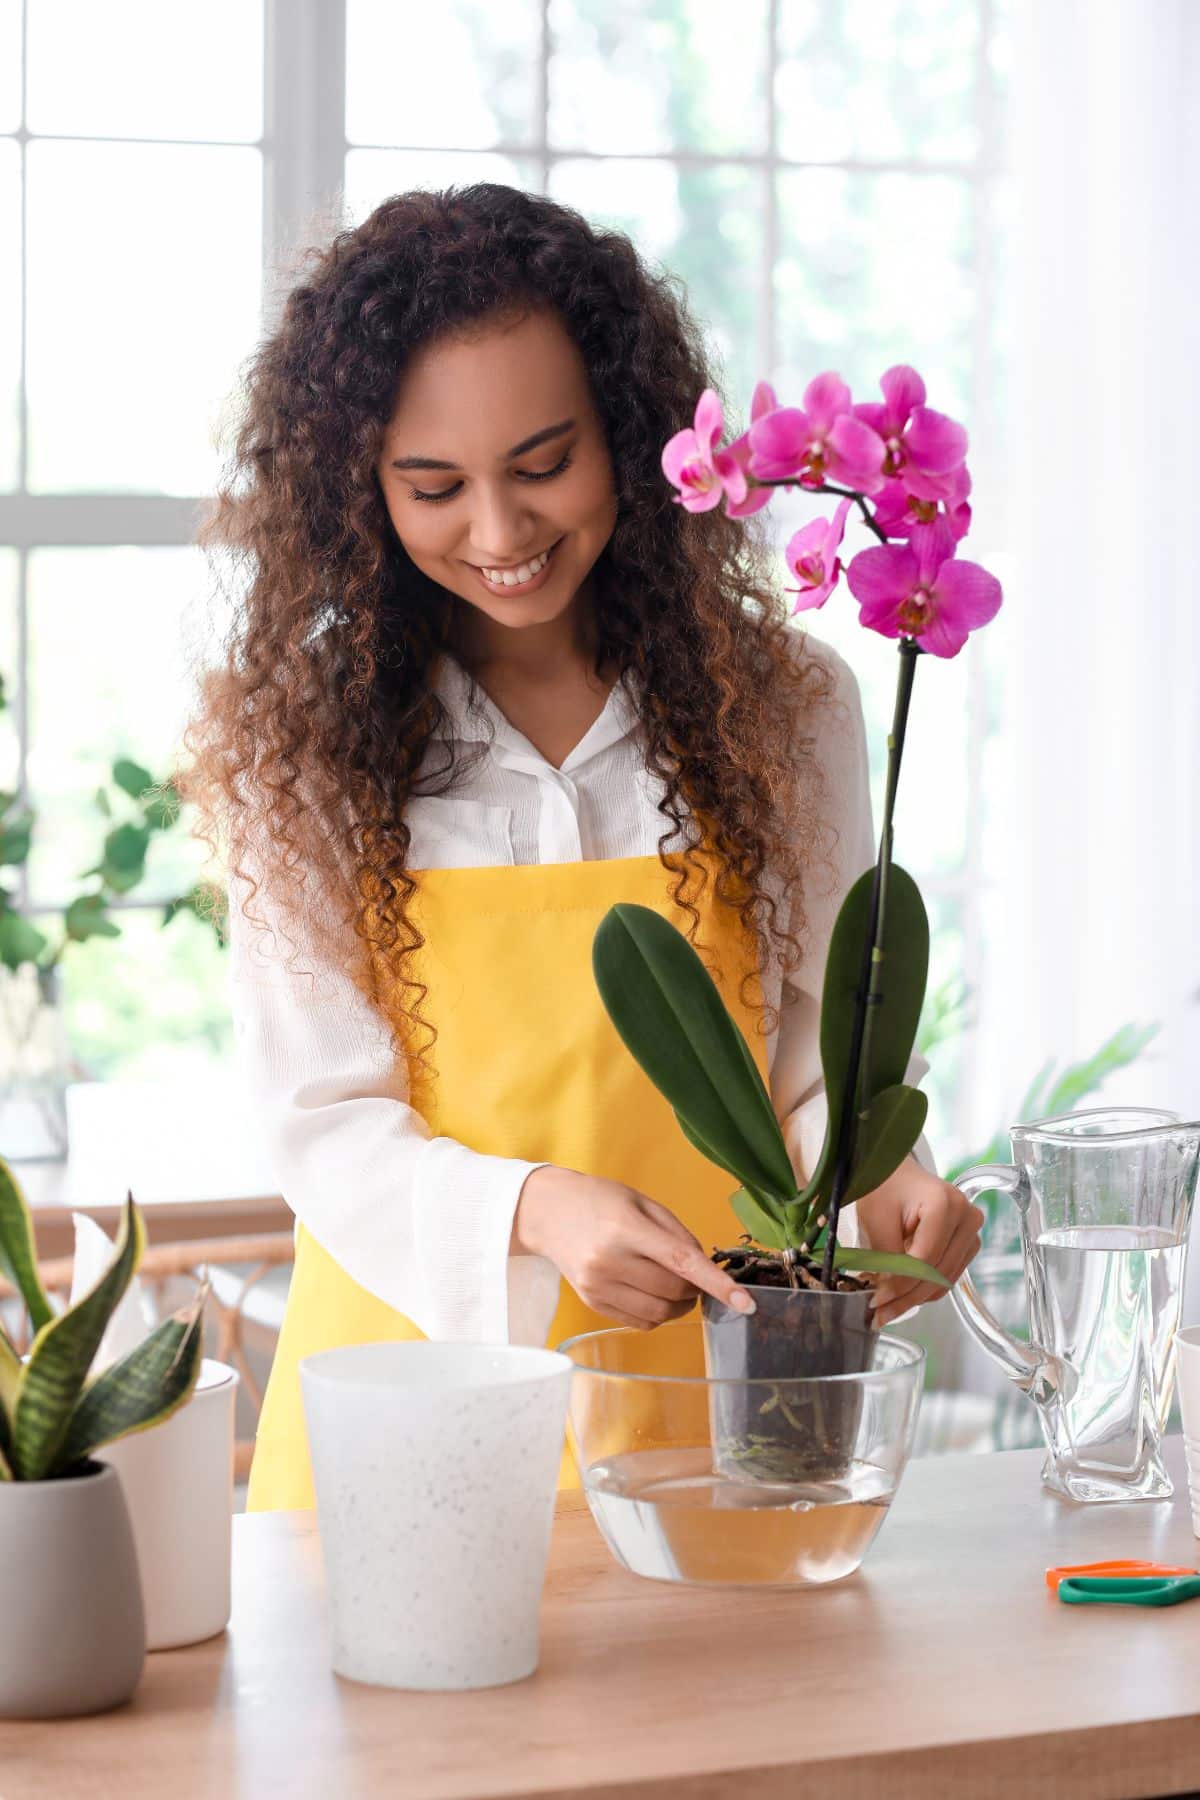 Watering an orchid in a bowl